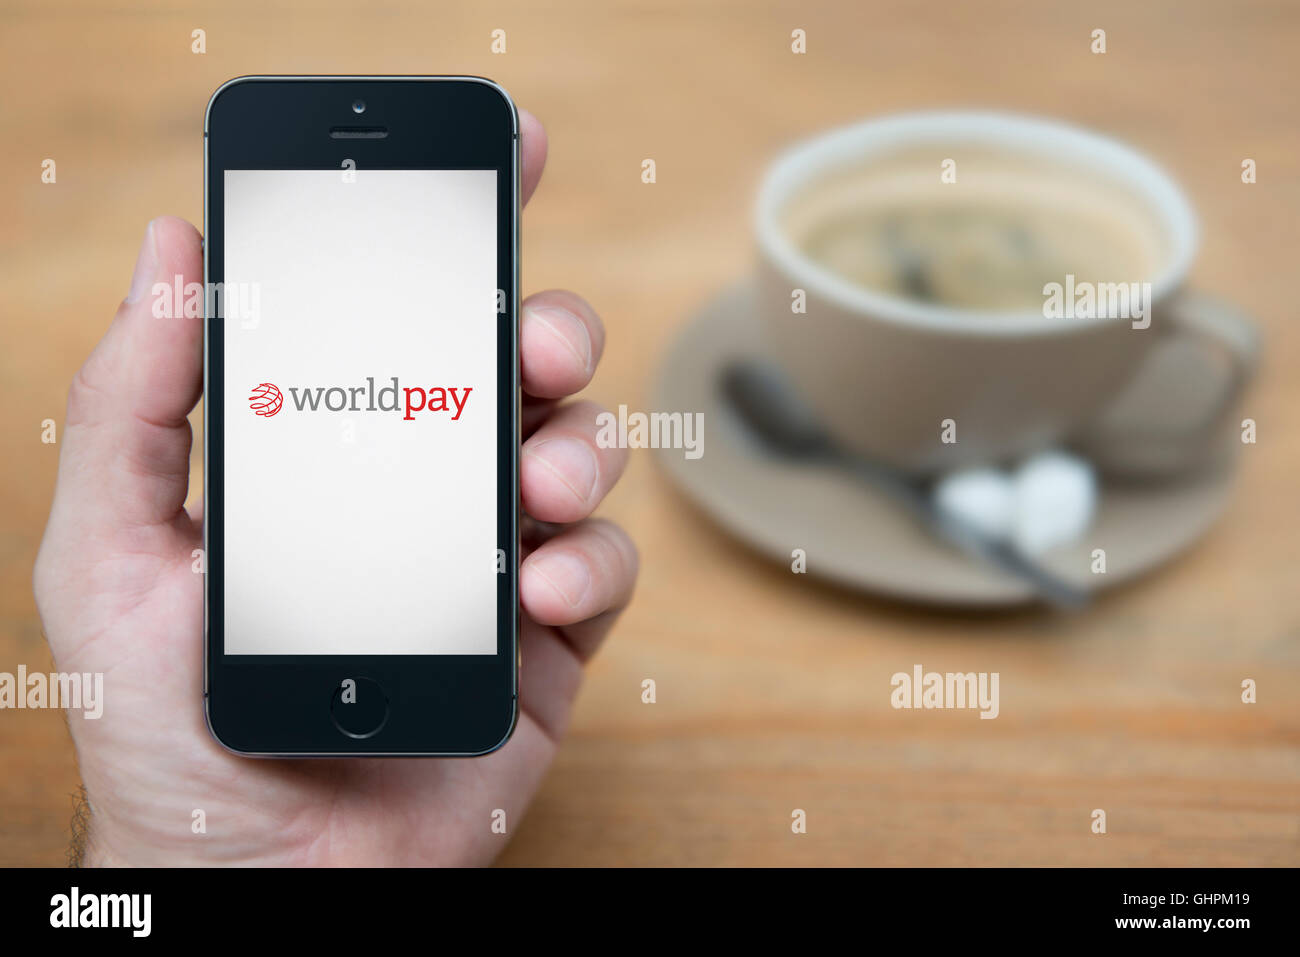 A man looks at his iPhone which displays the World Pay logo, while sat with a cup of coffee (Editorial use only). Stock Photo